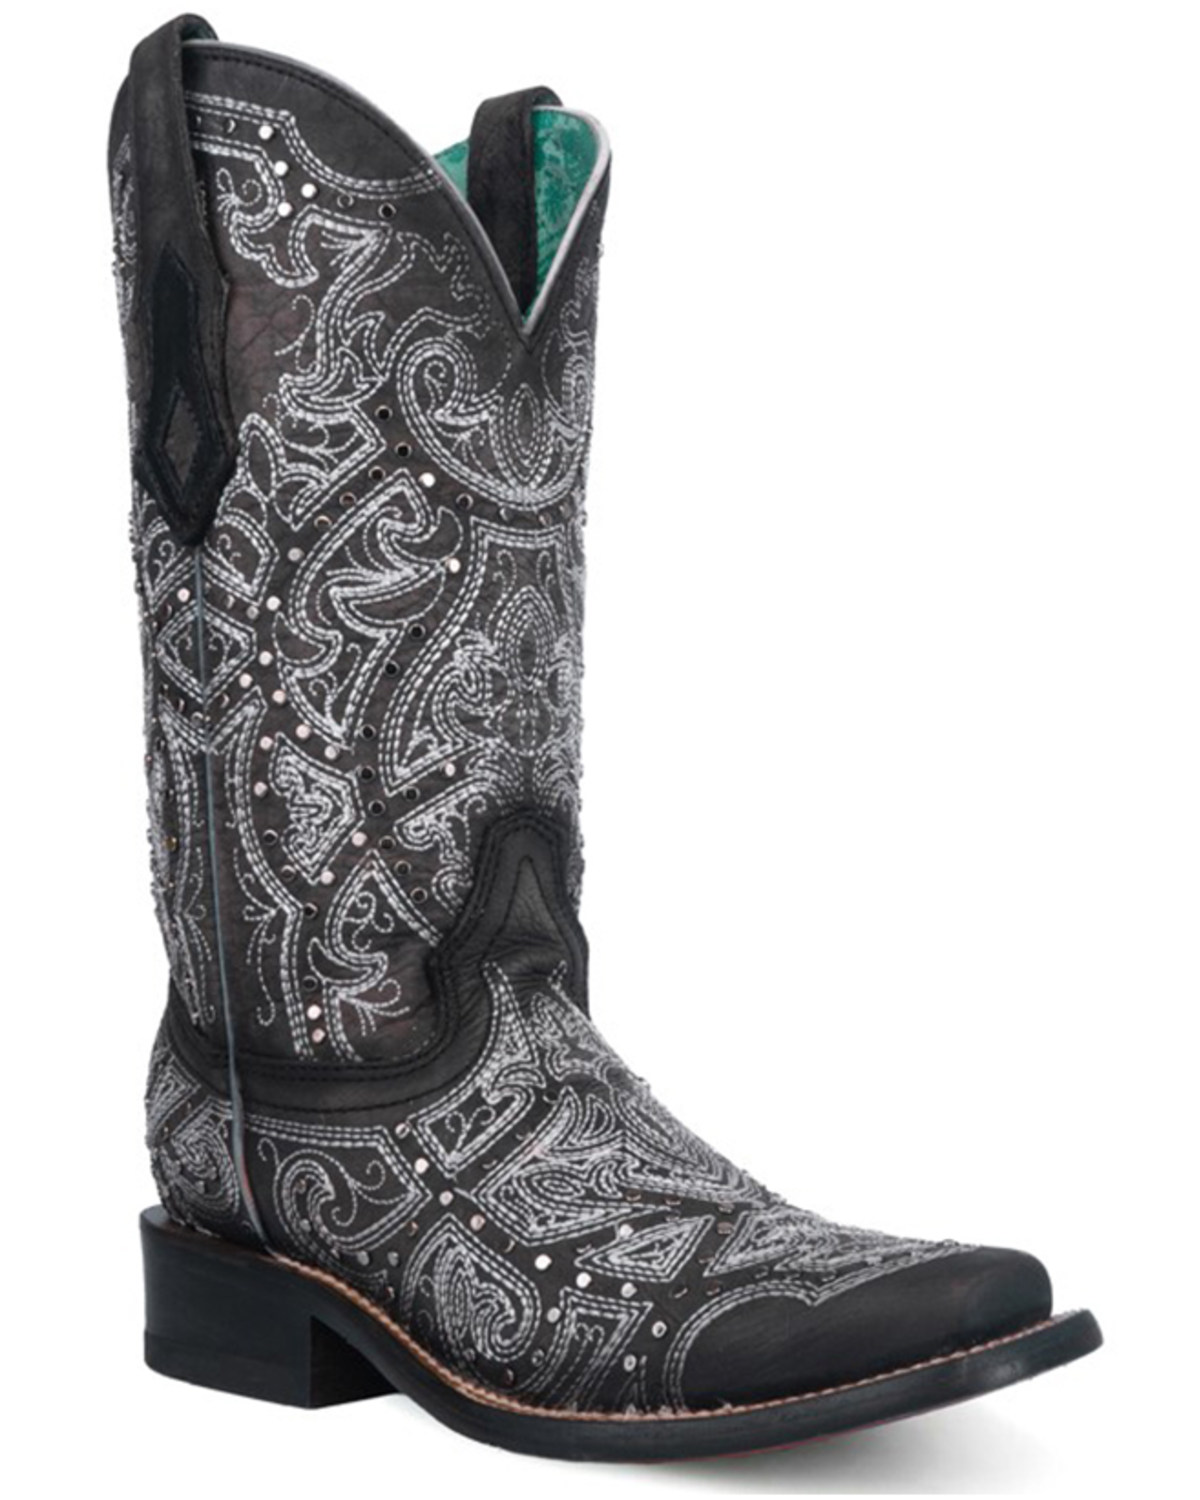 Corral Women's Embroidered Western Boots - Broad Square Toe